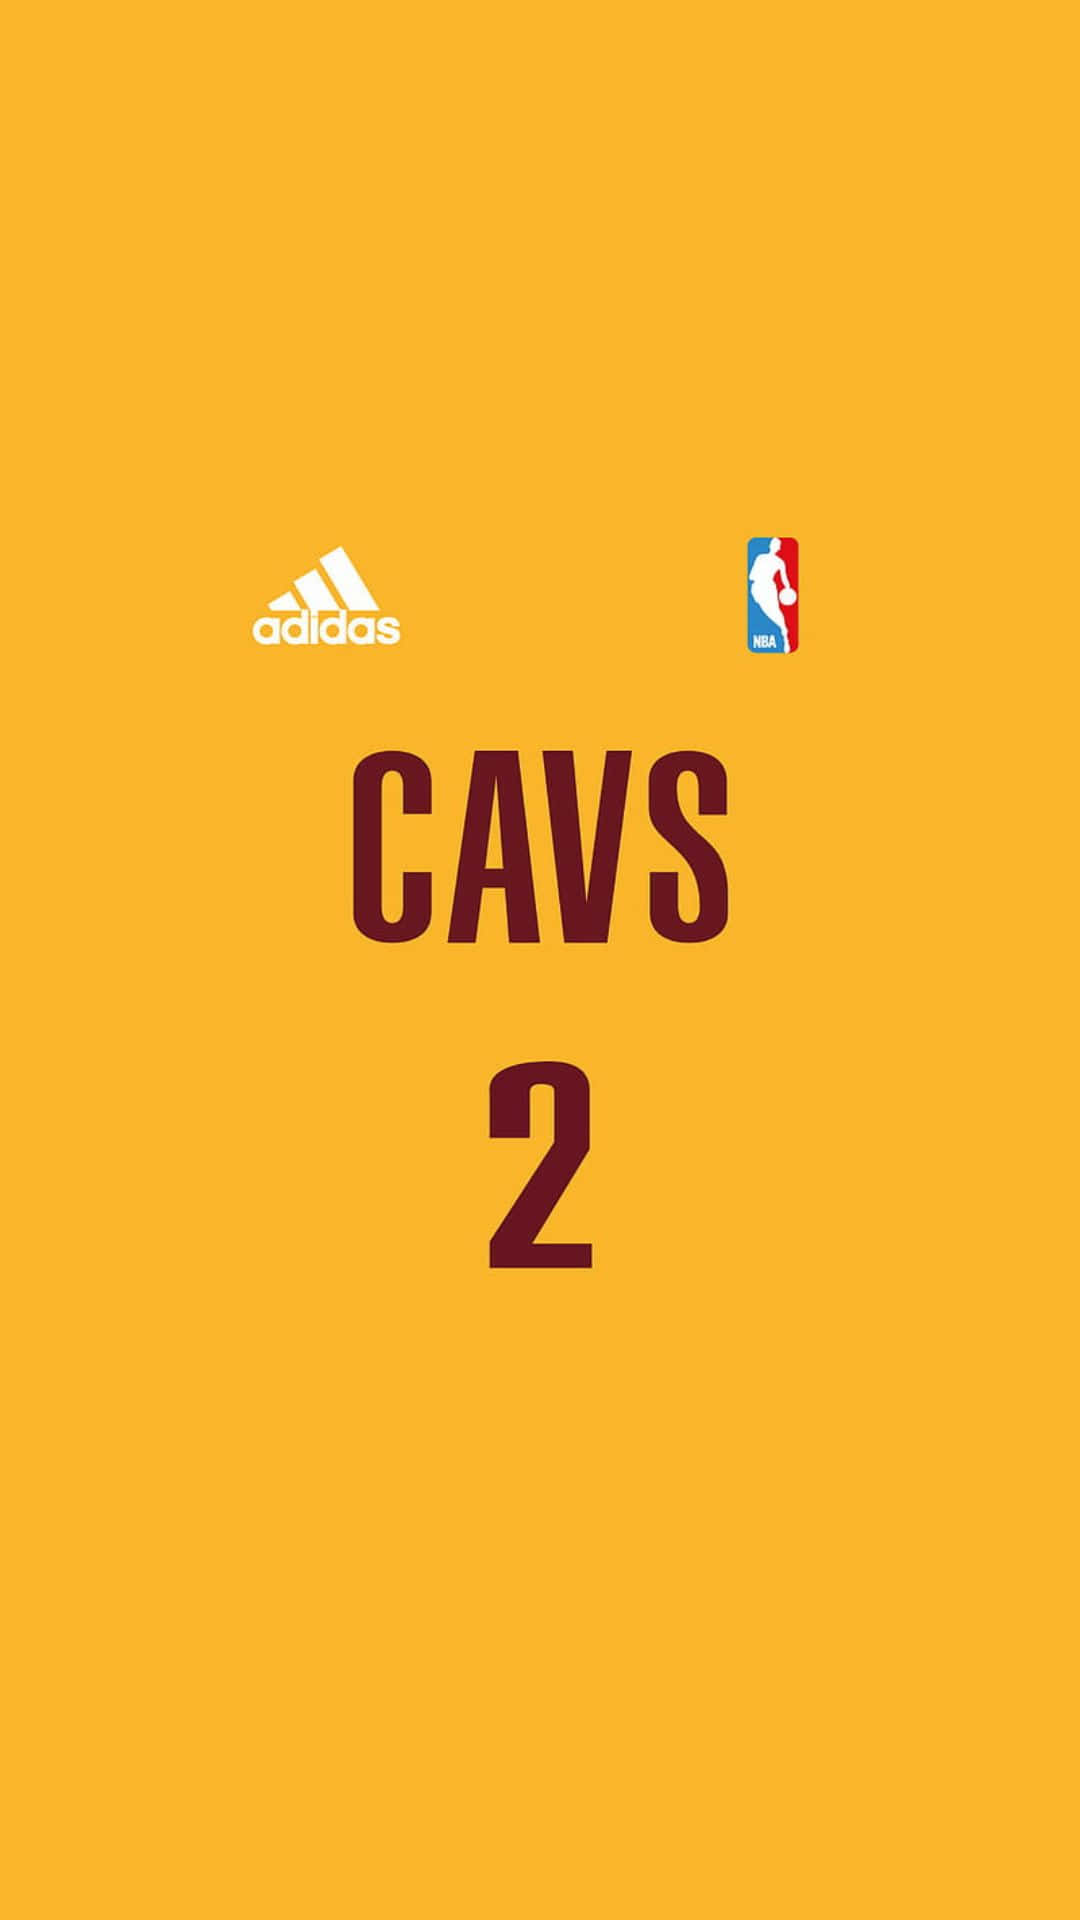 Cleveland Cavaliers Jersey Number2 Adidas Wallpaper